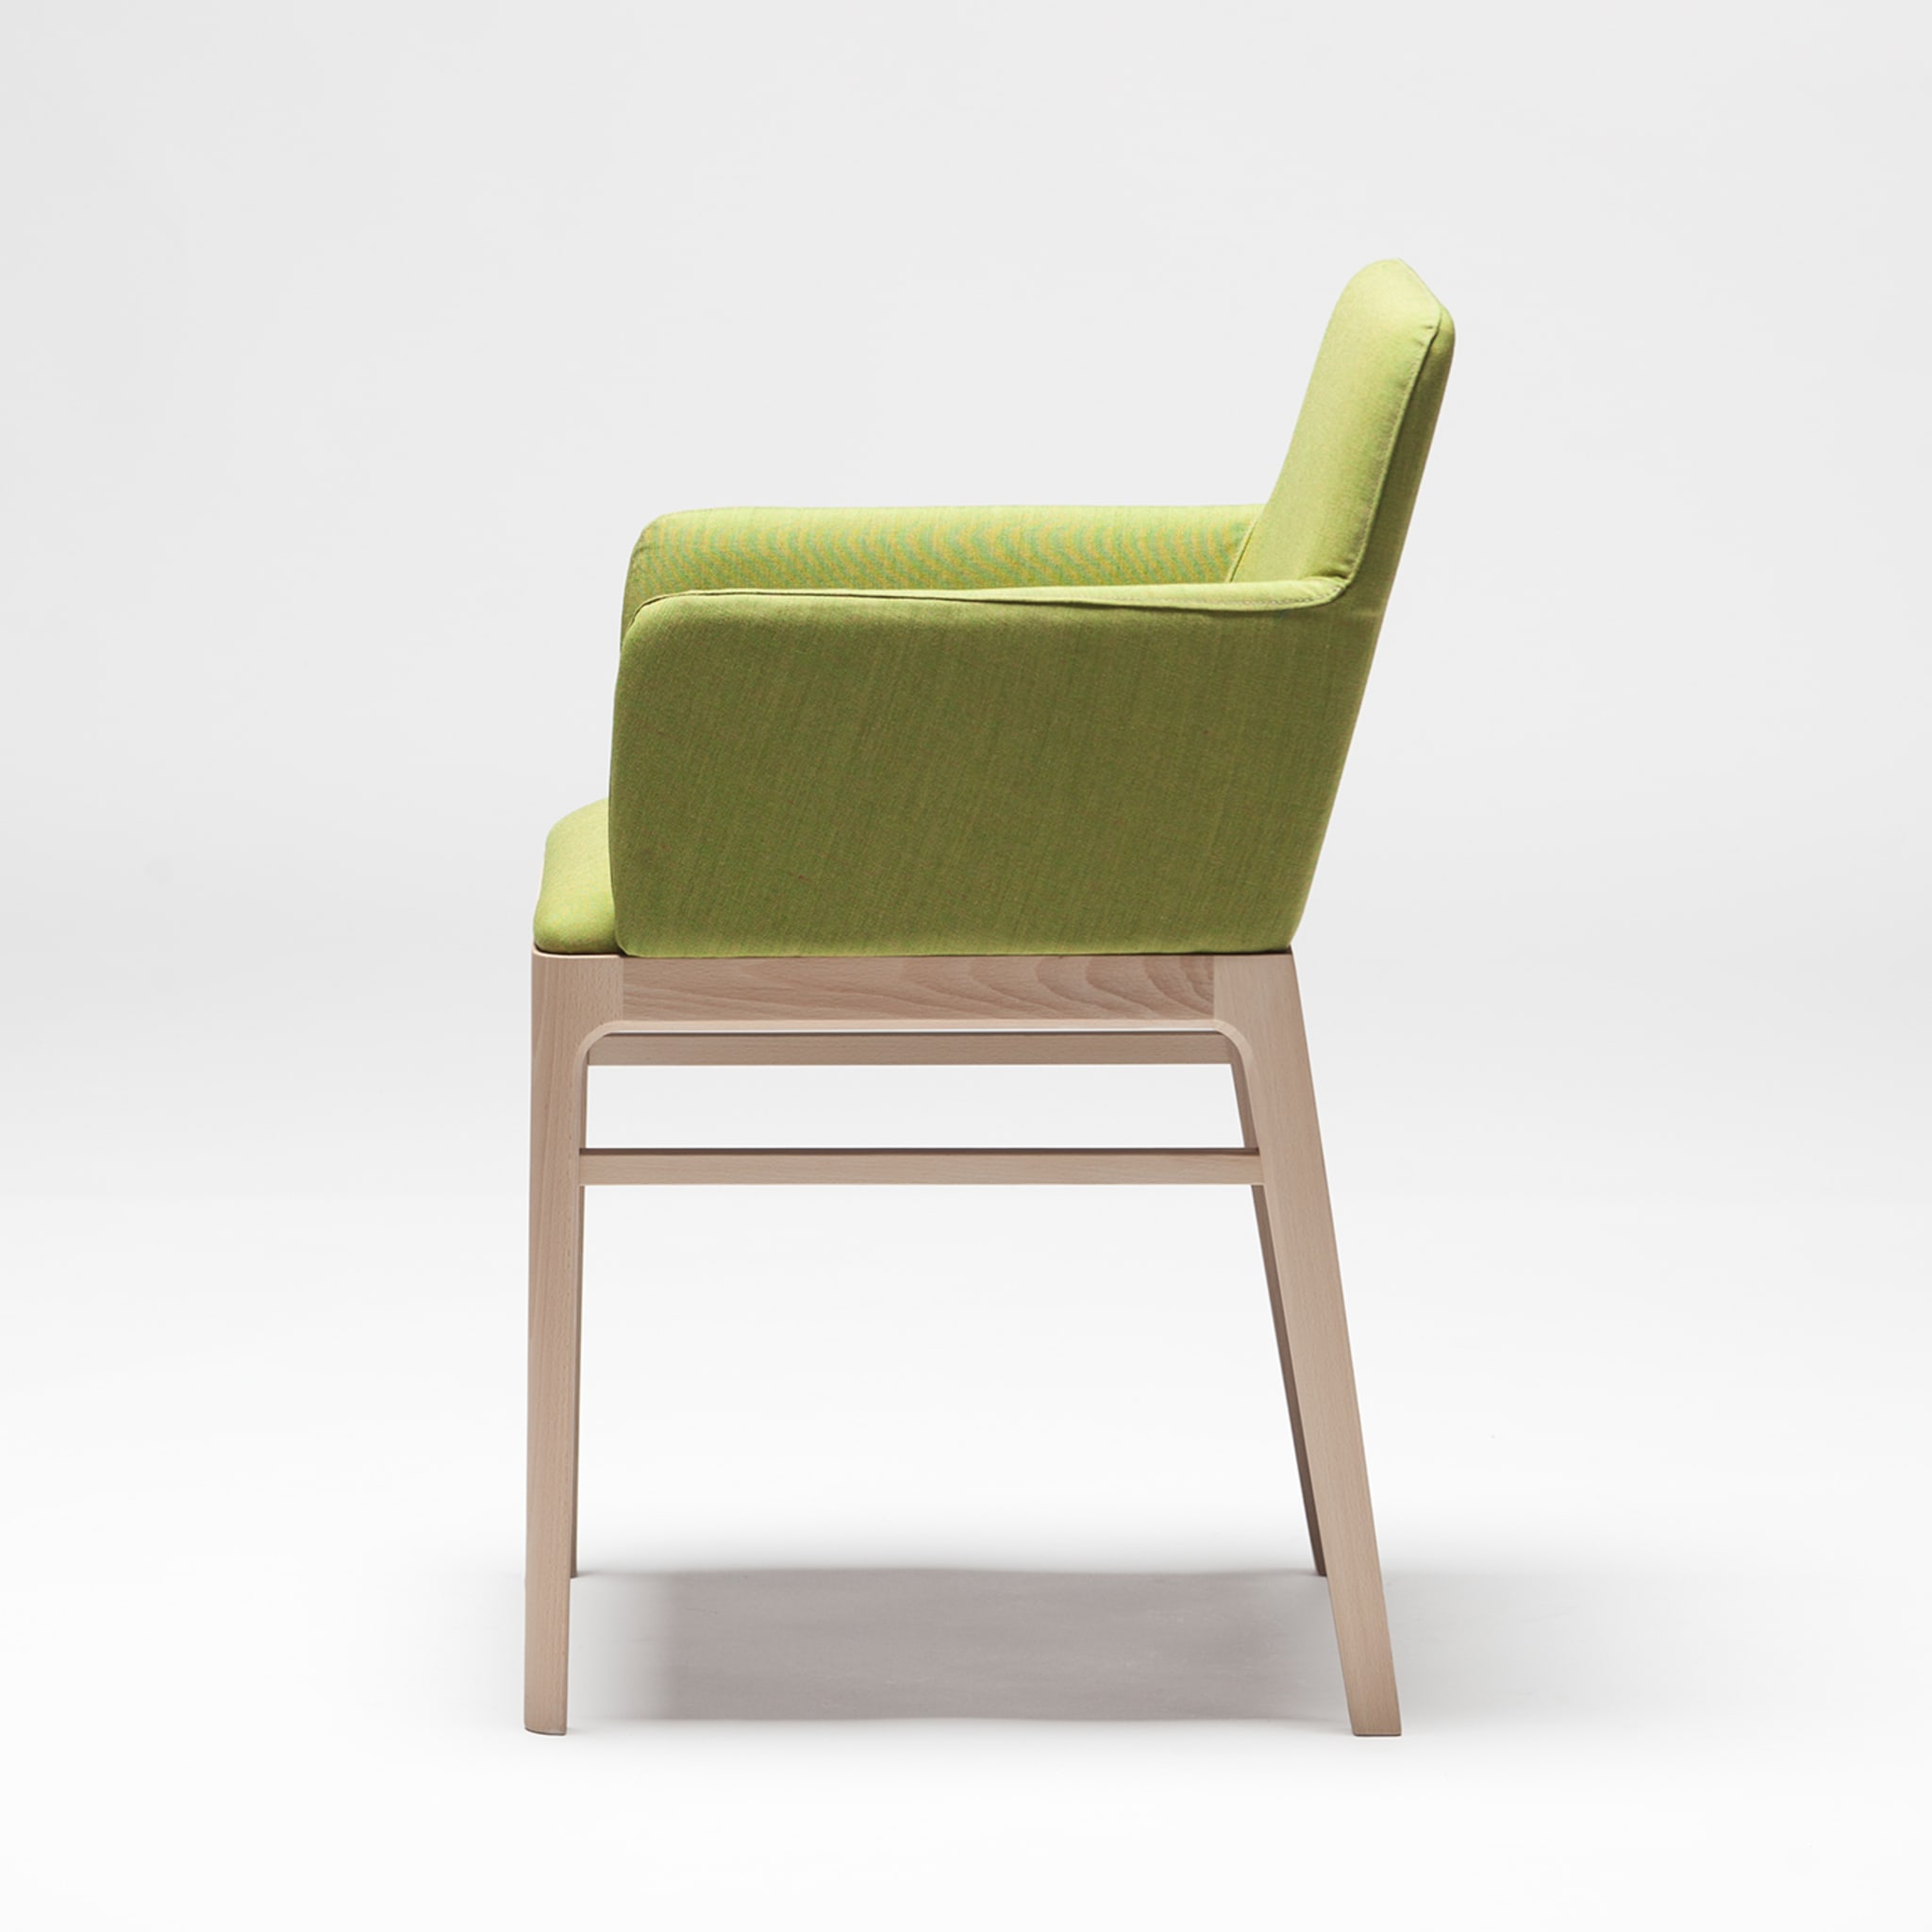 Tip Tap 381 Green Armchair by Claudio Perin - Alternative view 2